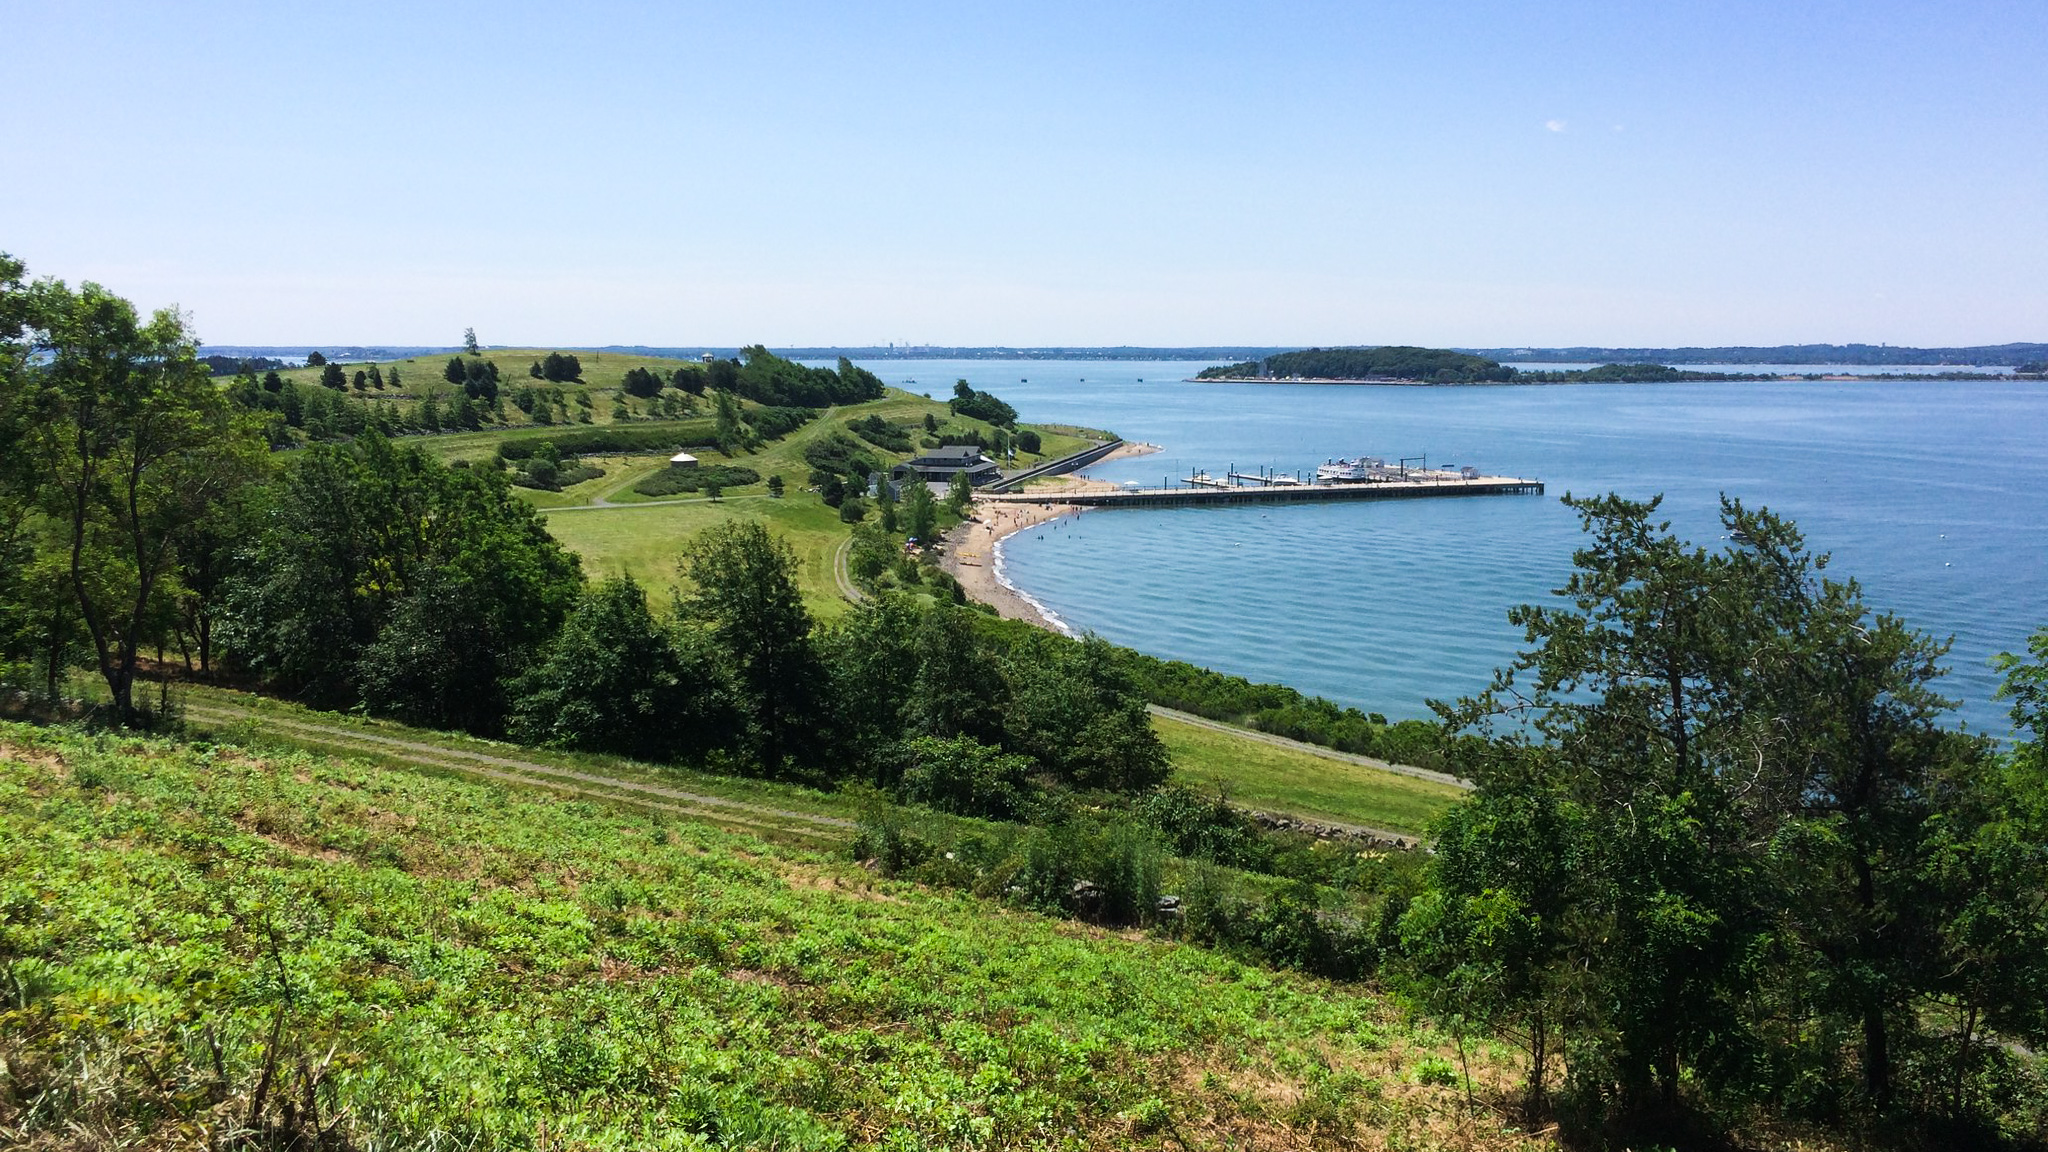 Image for spectacle island, the site where krystle campbell's stone marker came from 